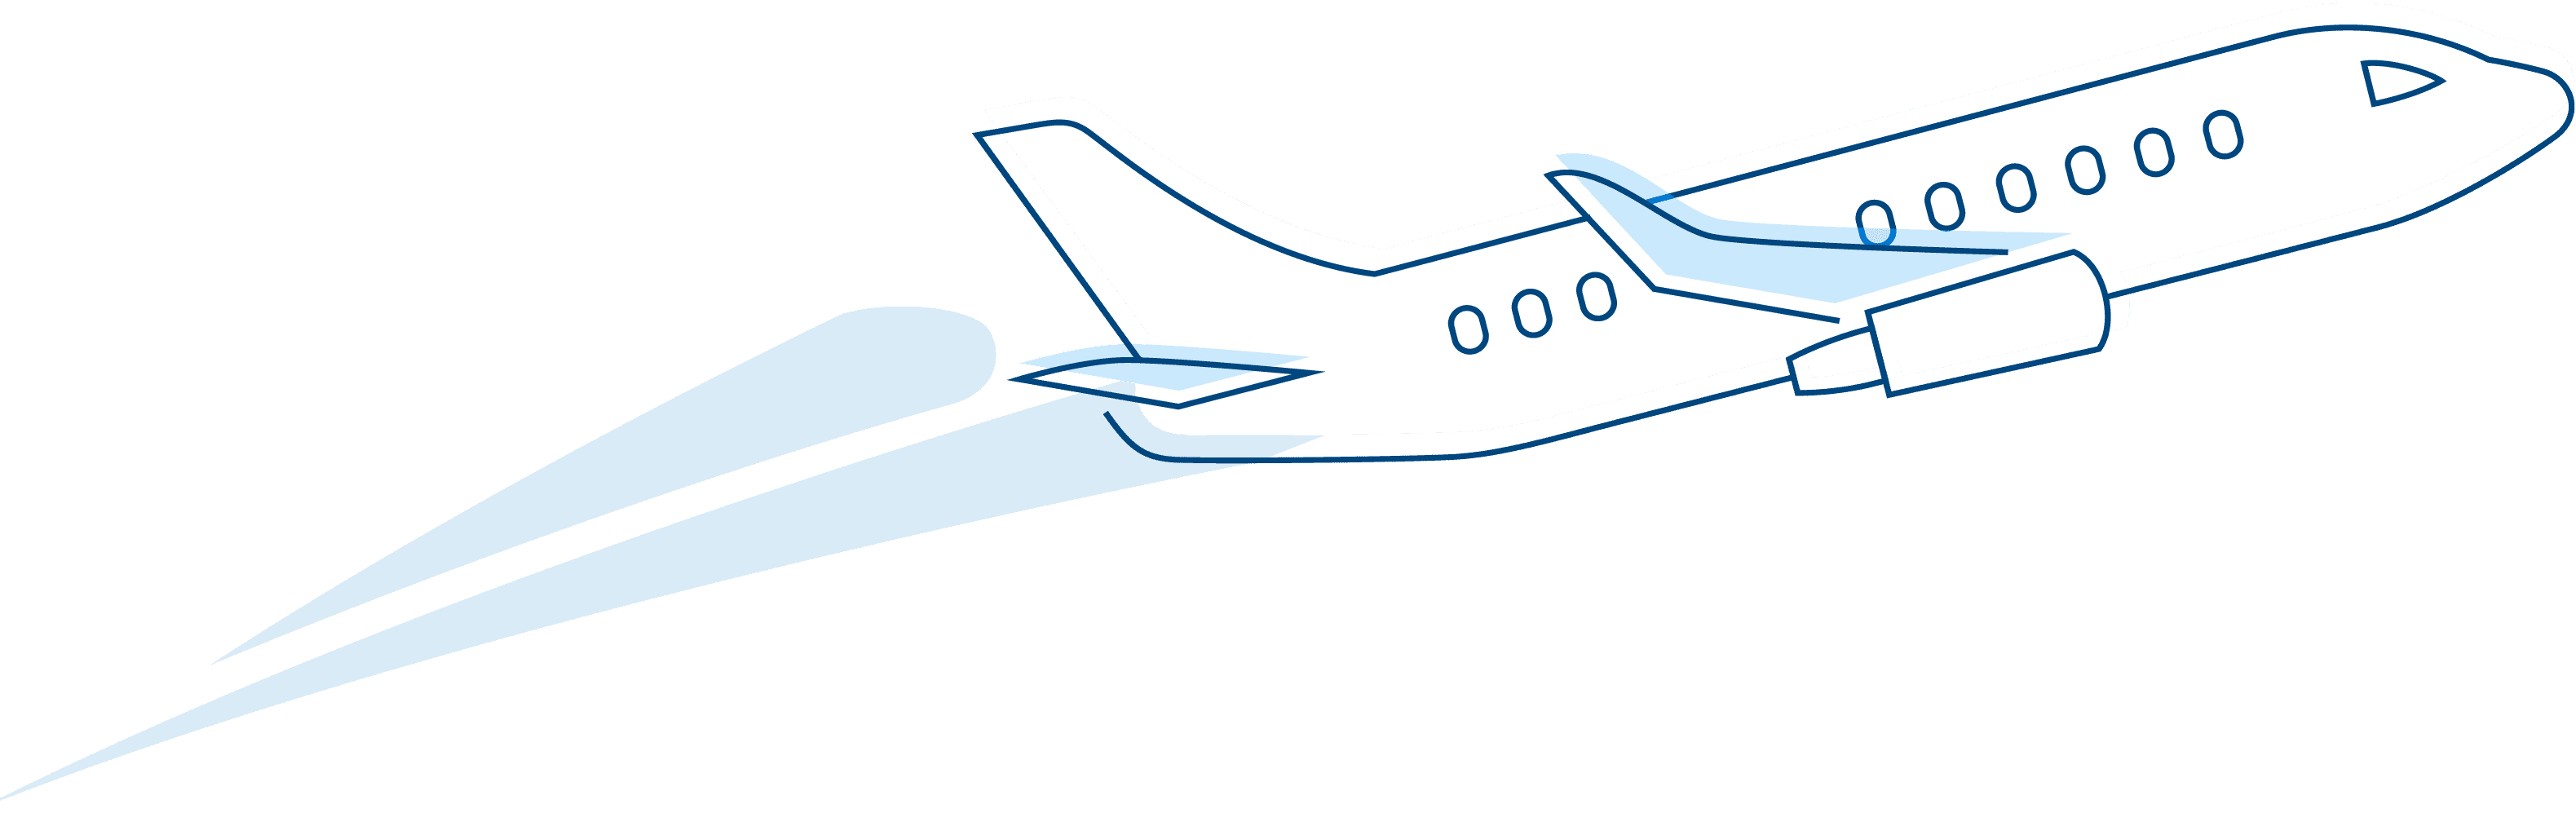 Illustration of an airplane taking off